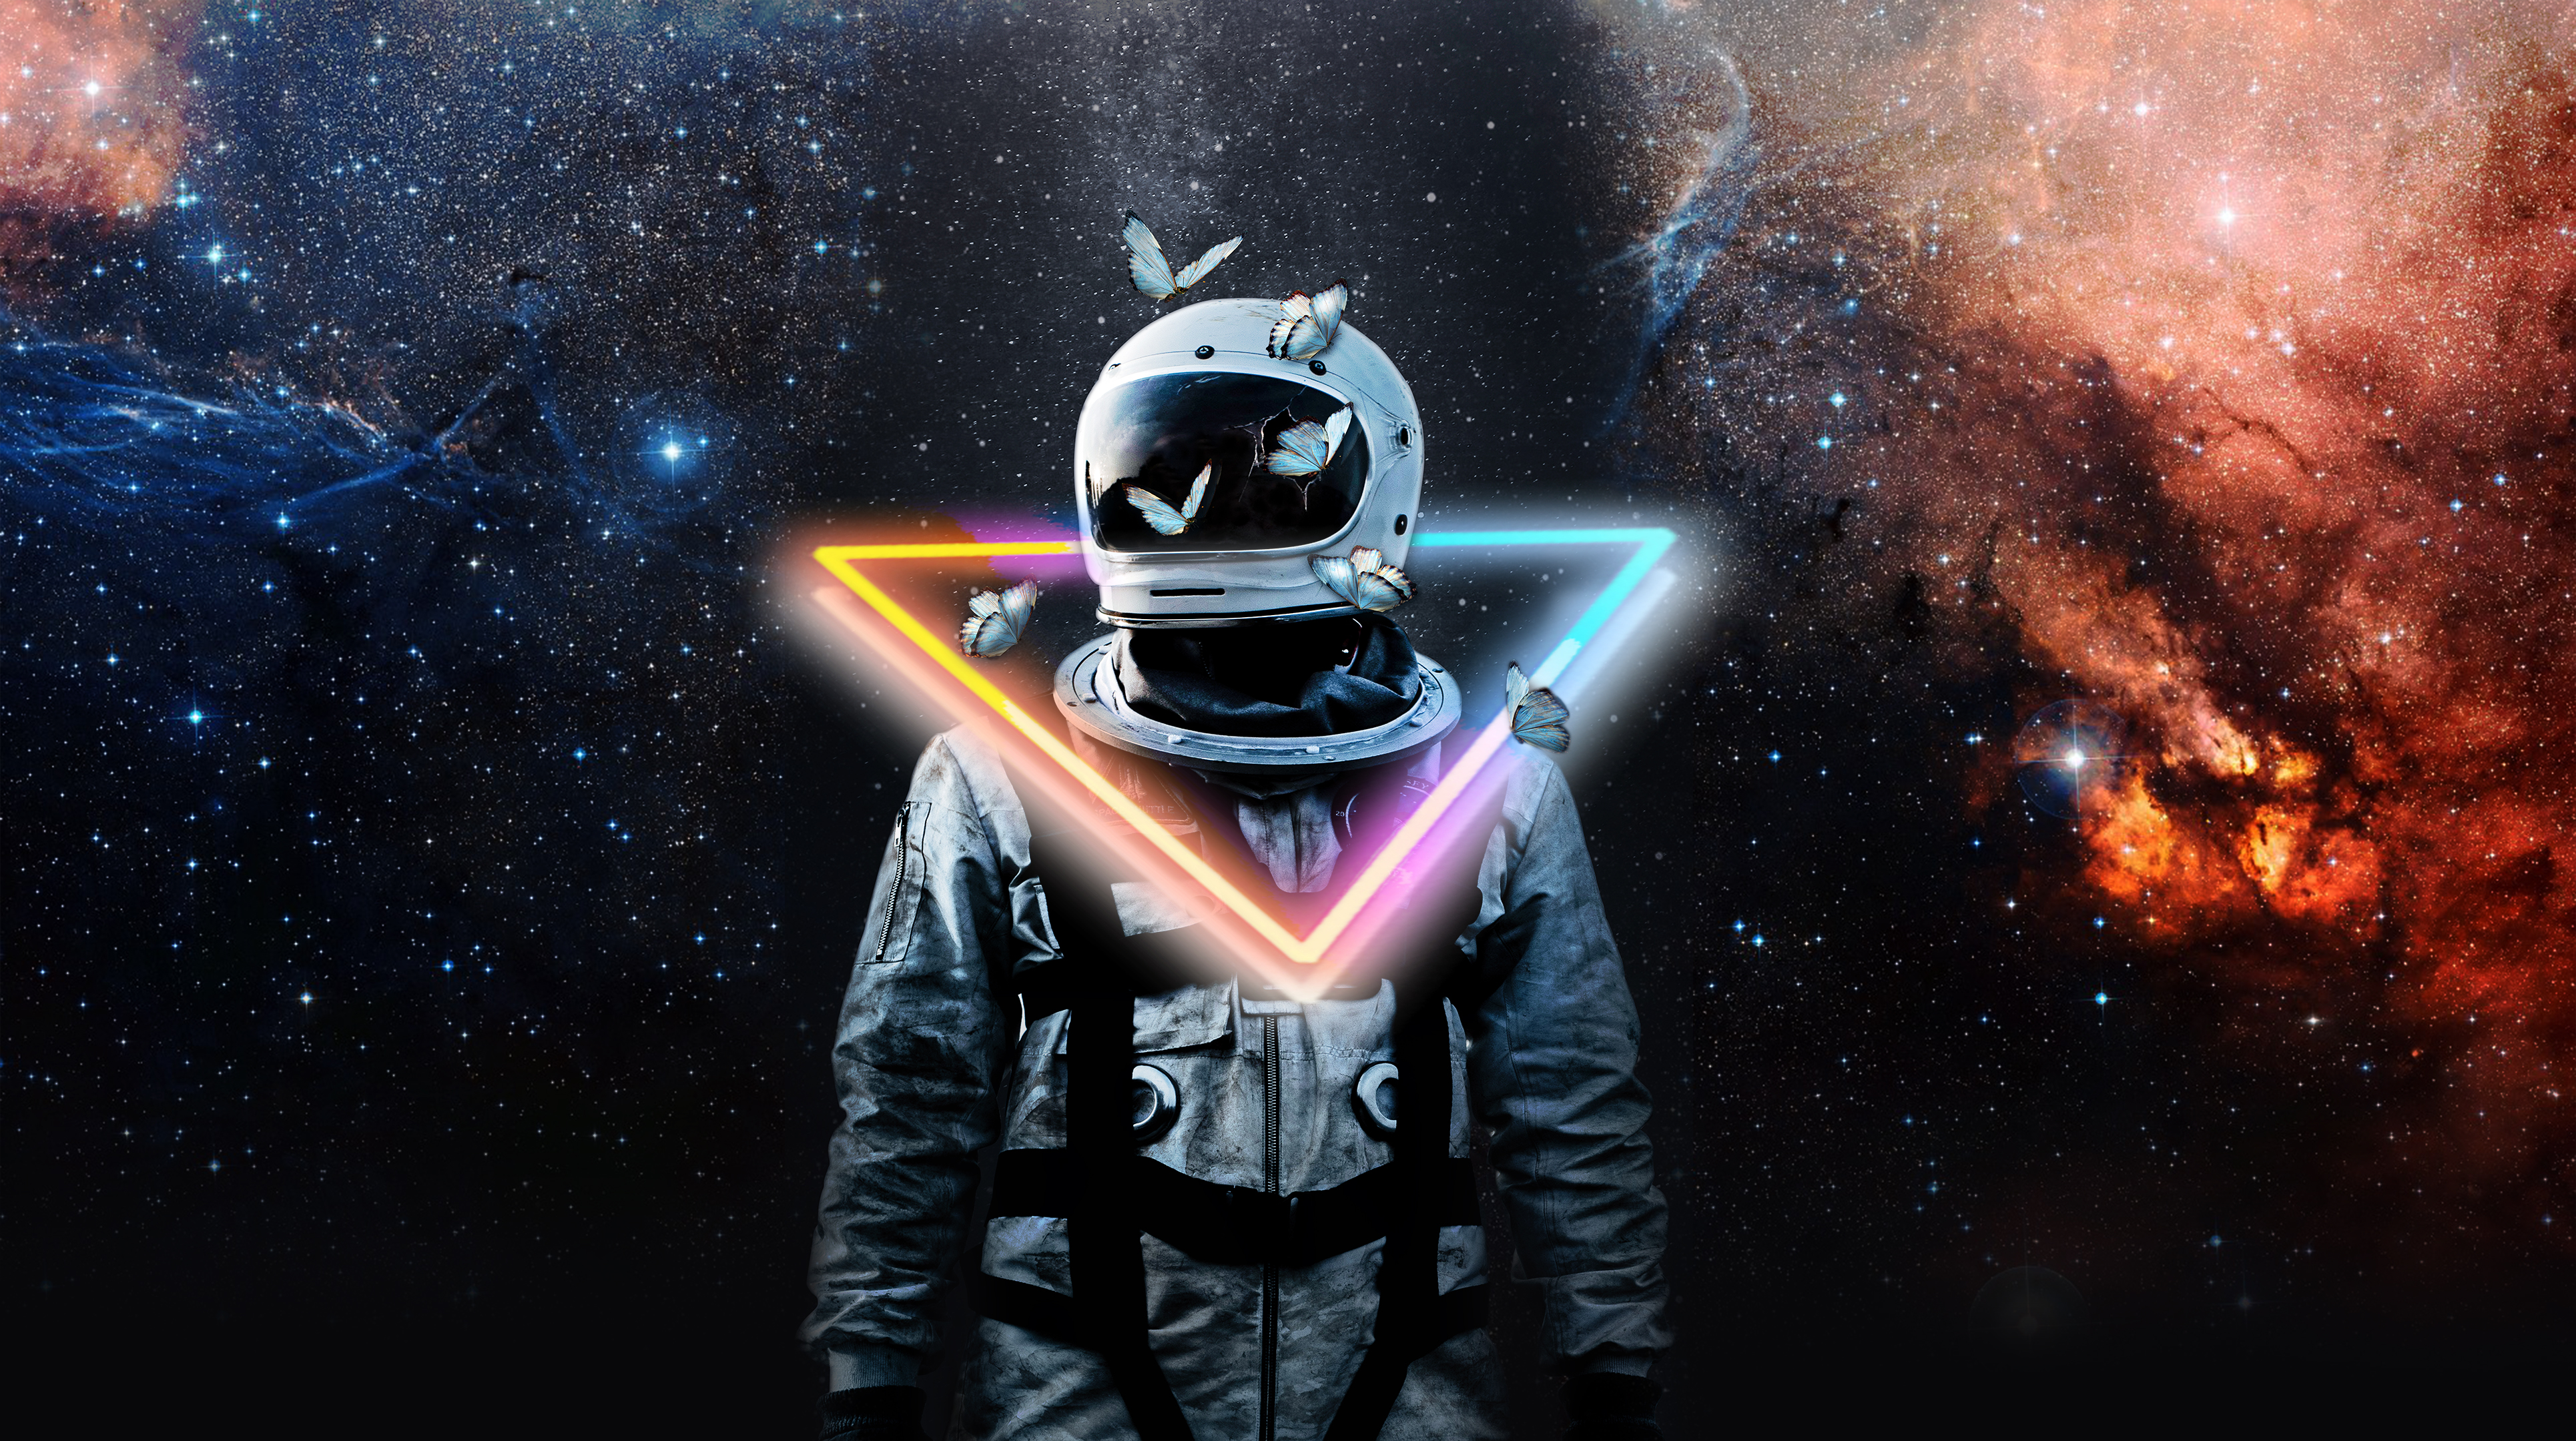 General 3860x2160 astronaut abstract neon galaxy